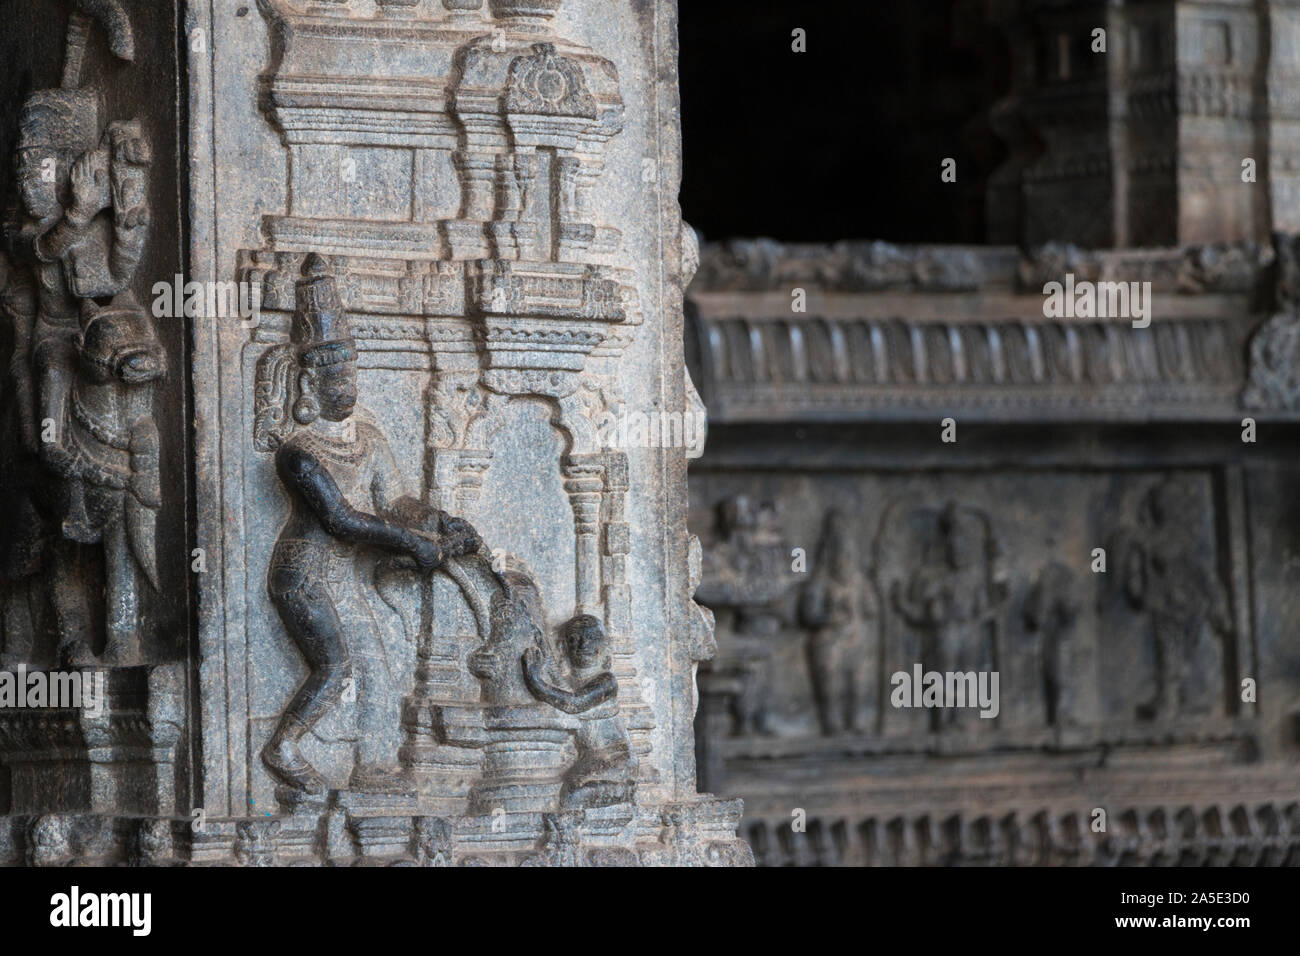 Post from inside Fort Vellore Hindu Temple showing one God divinity, in Vellore India, Tamil Nadu september 2019 Stock Photo